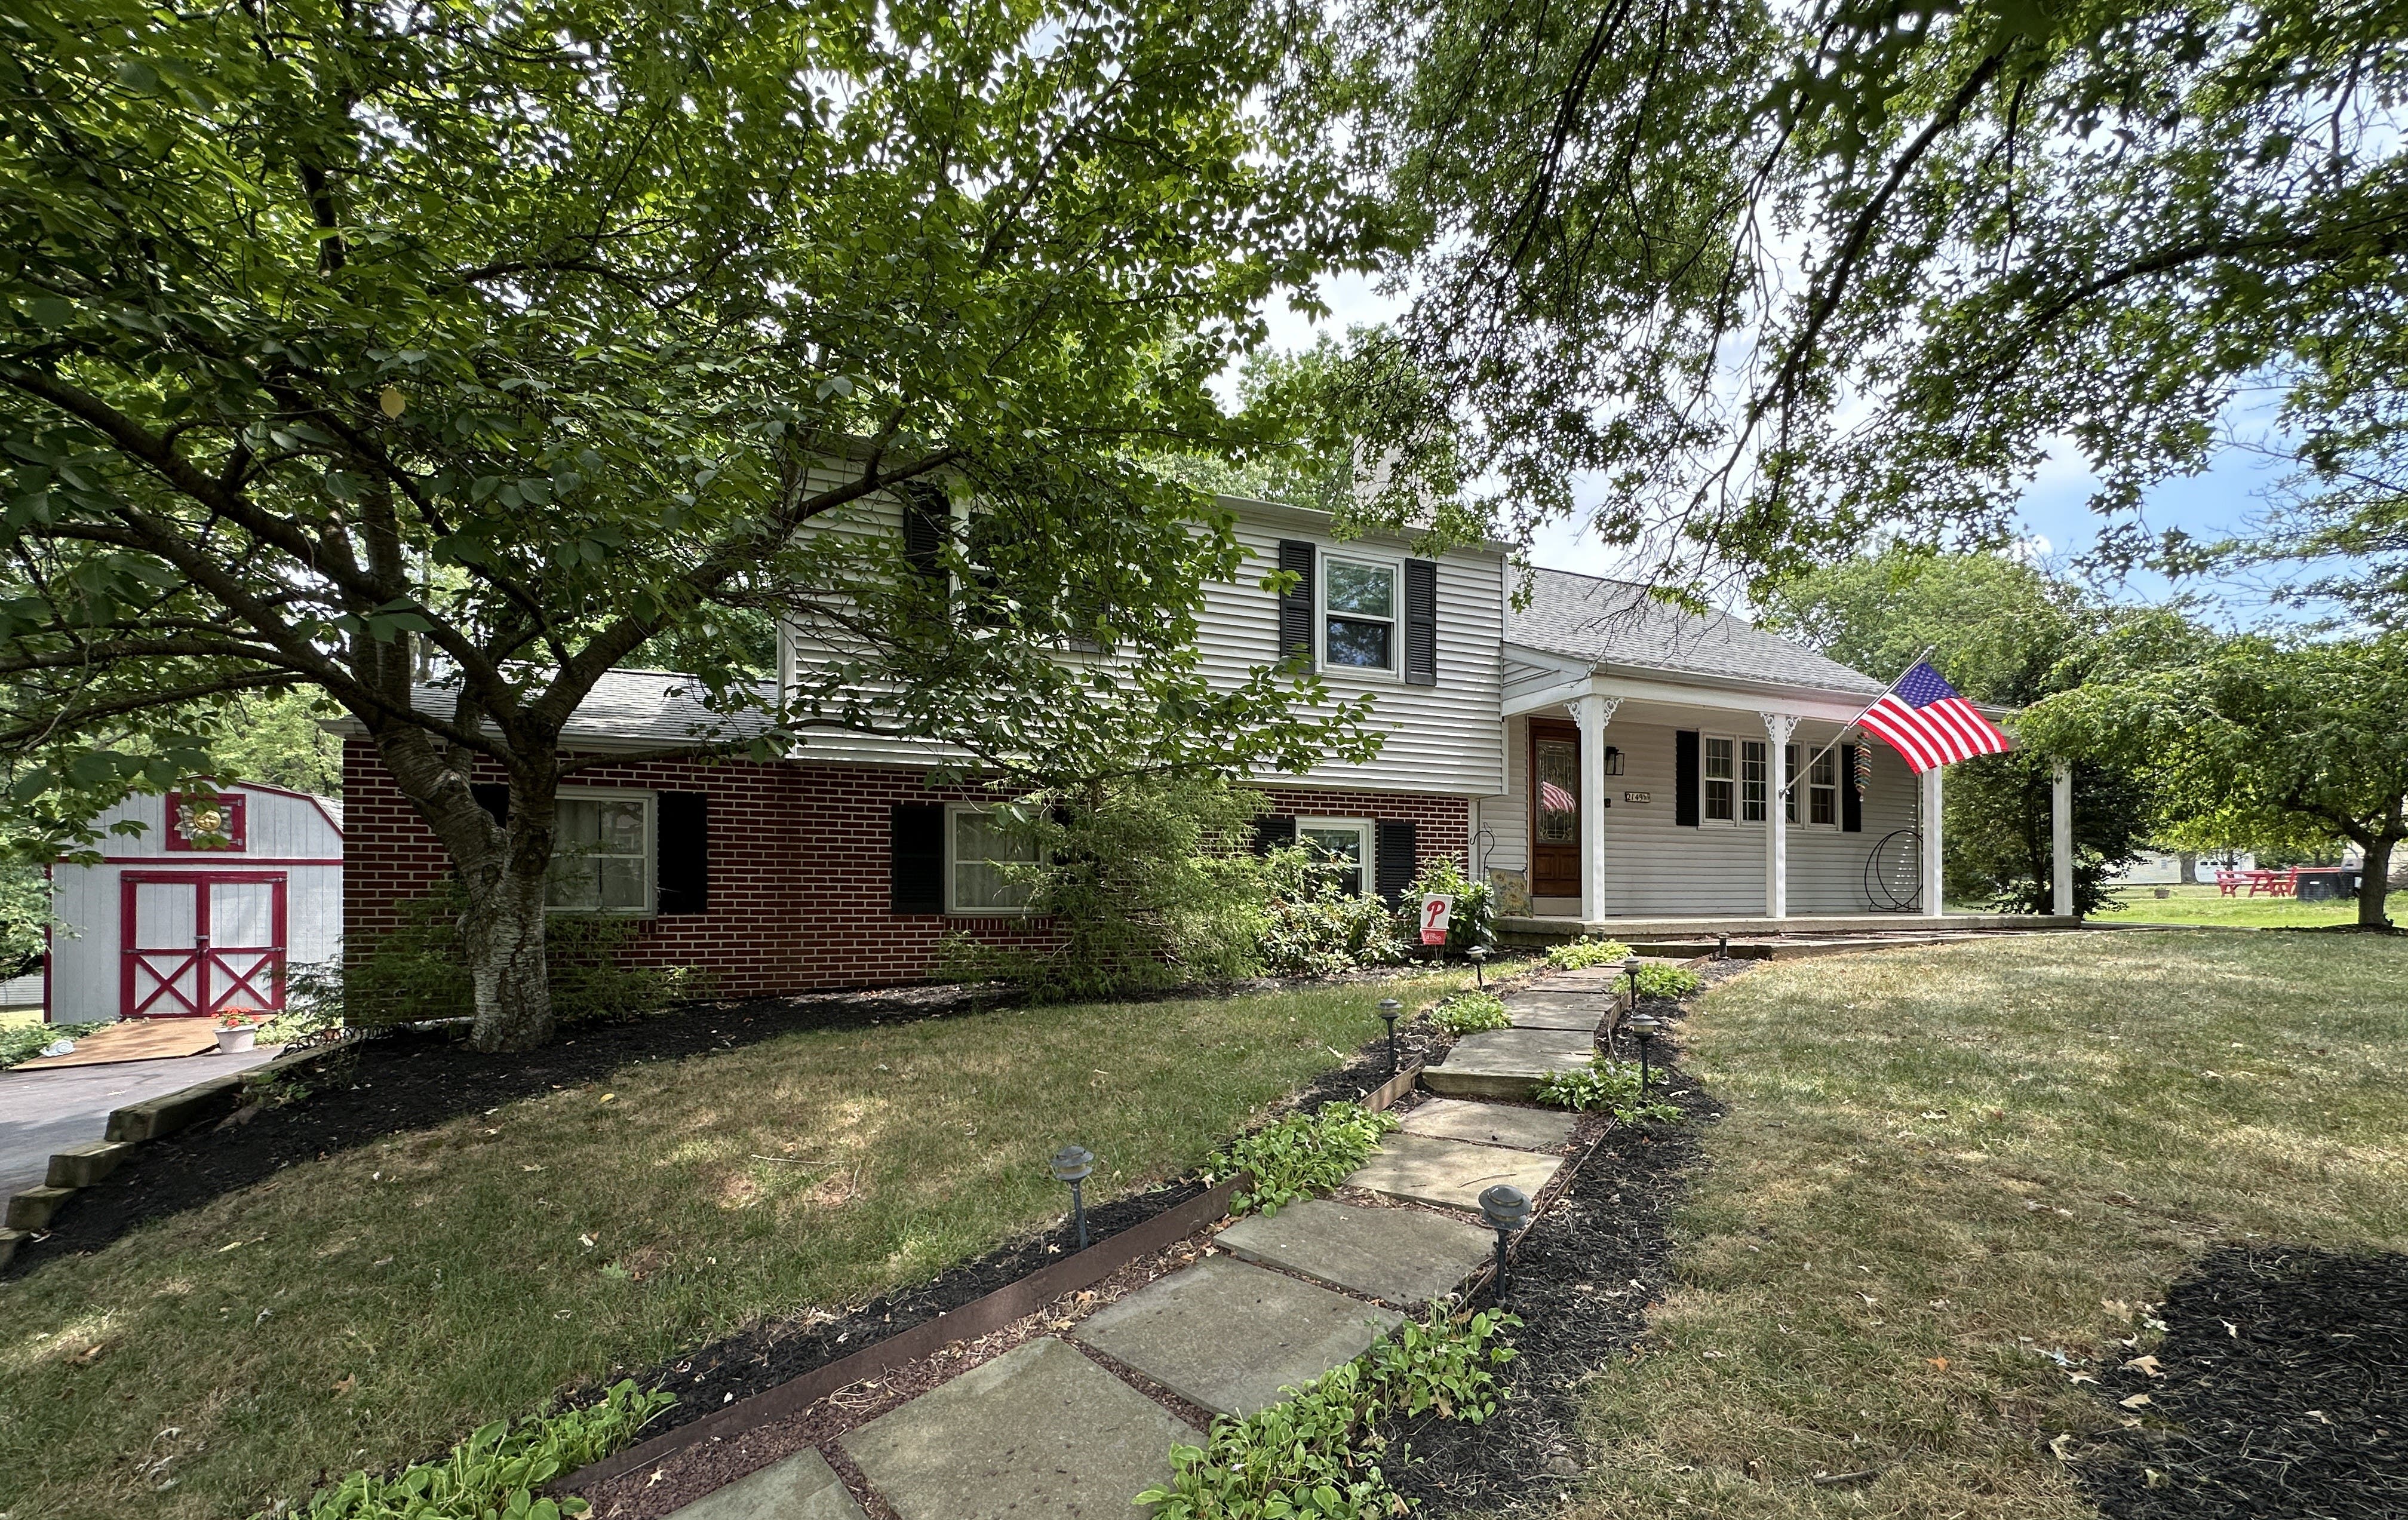 4BR Home in Towamencin Twp | North Penn Schools | Open House July 25th 